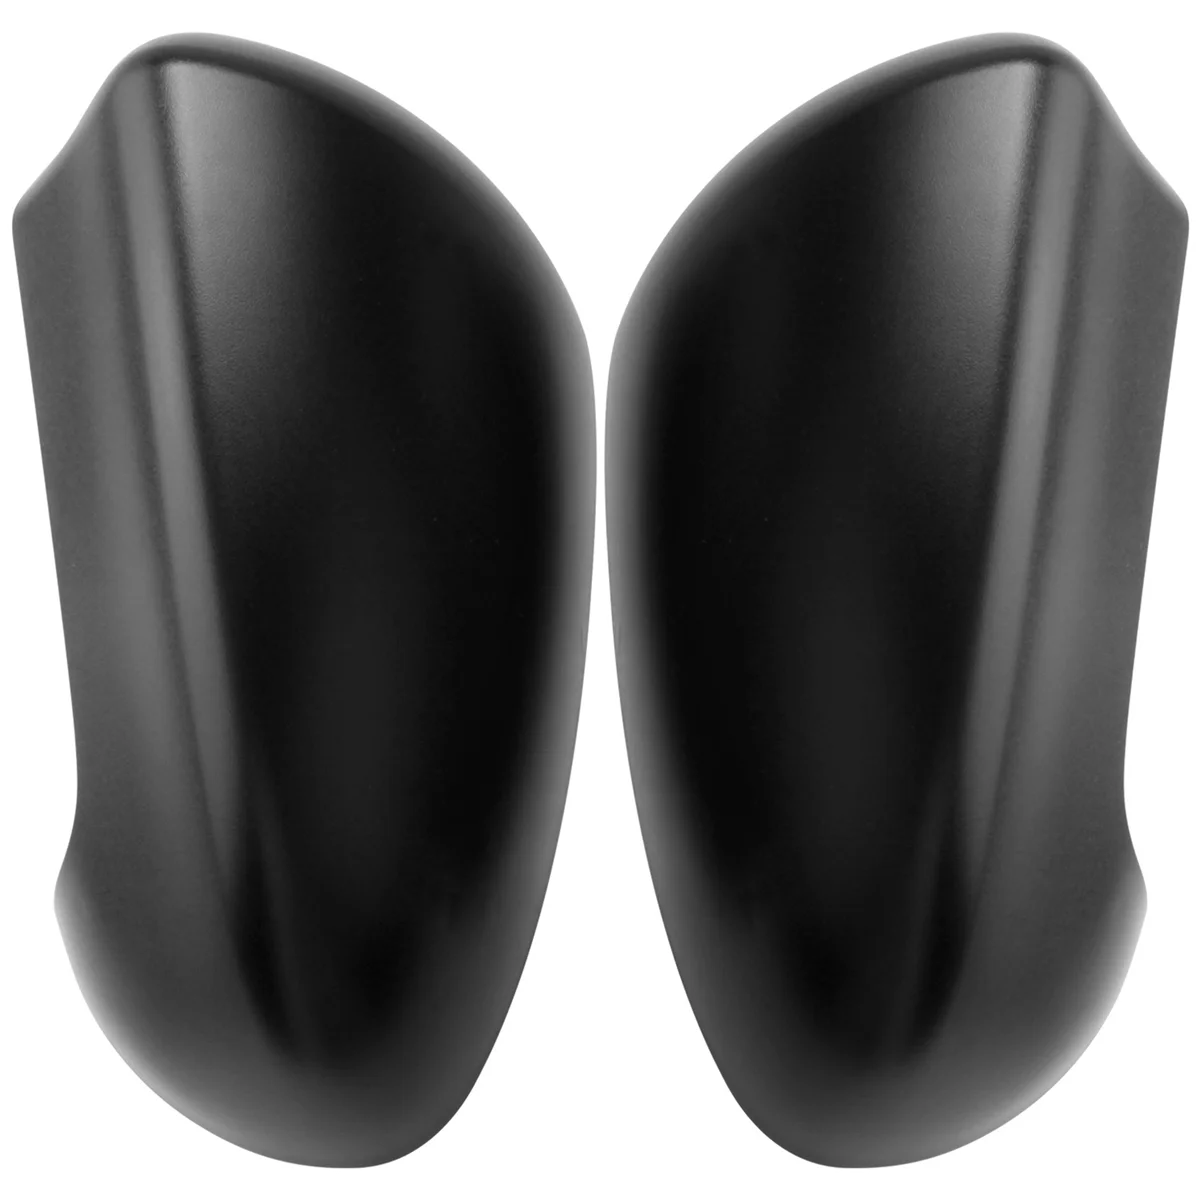 

2Pcs for Nissan Qashqai 2007-2014 Side Door Rearview Mirror Cover Trims Car Accessories Left +Right Side